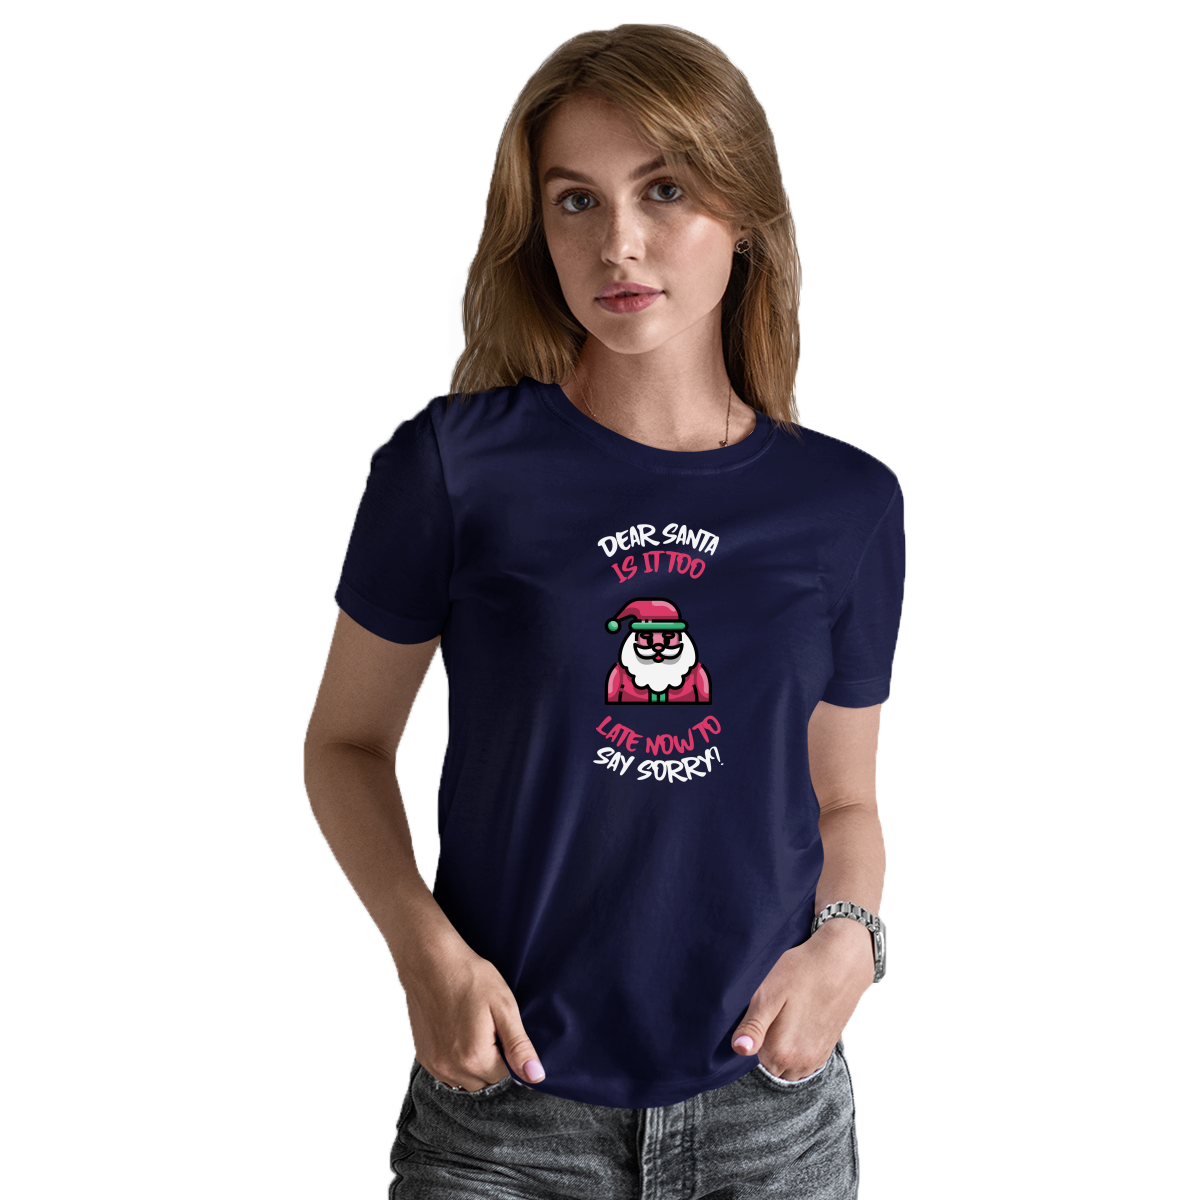 Dear Santa, Is It Too Late to Say Sorry? Women's T-shirt | Navy